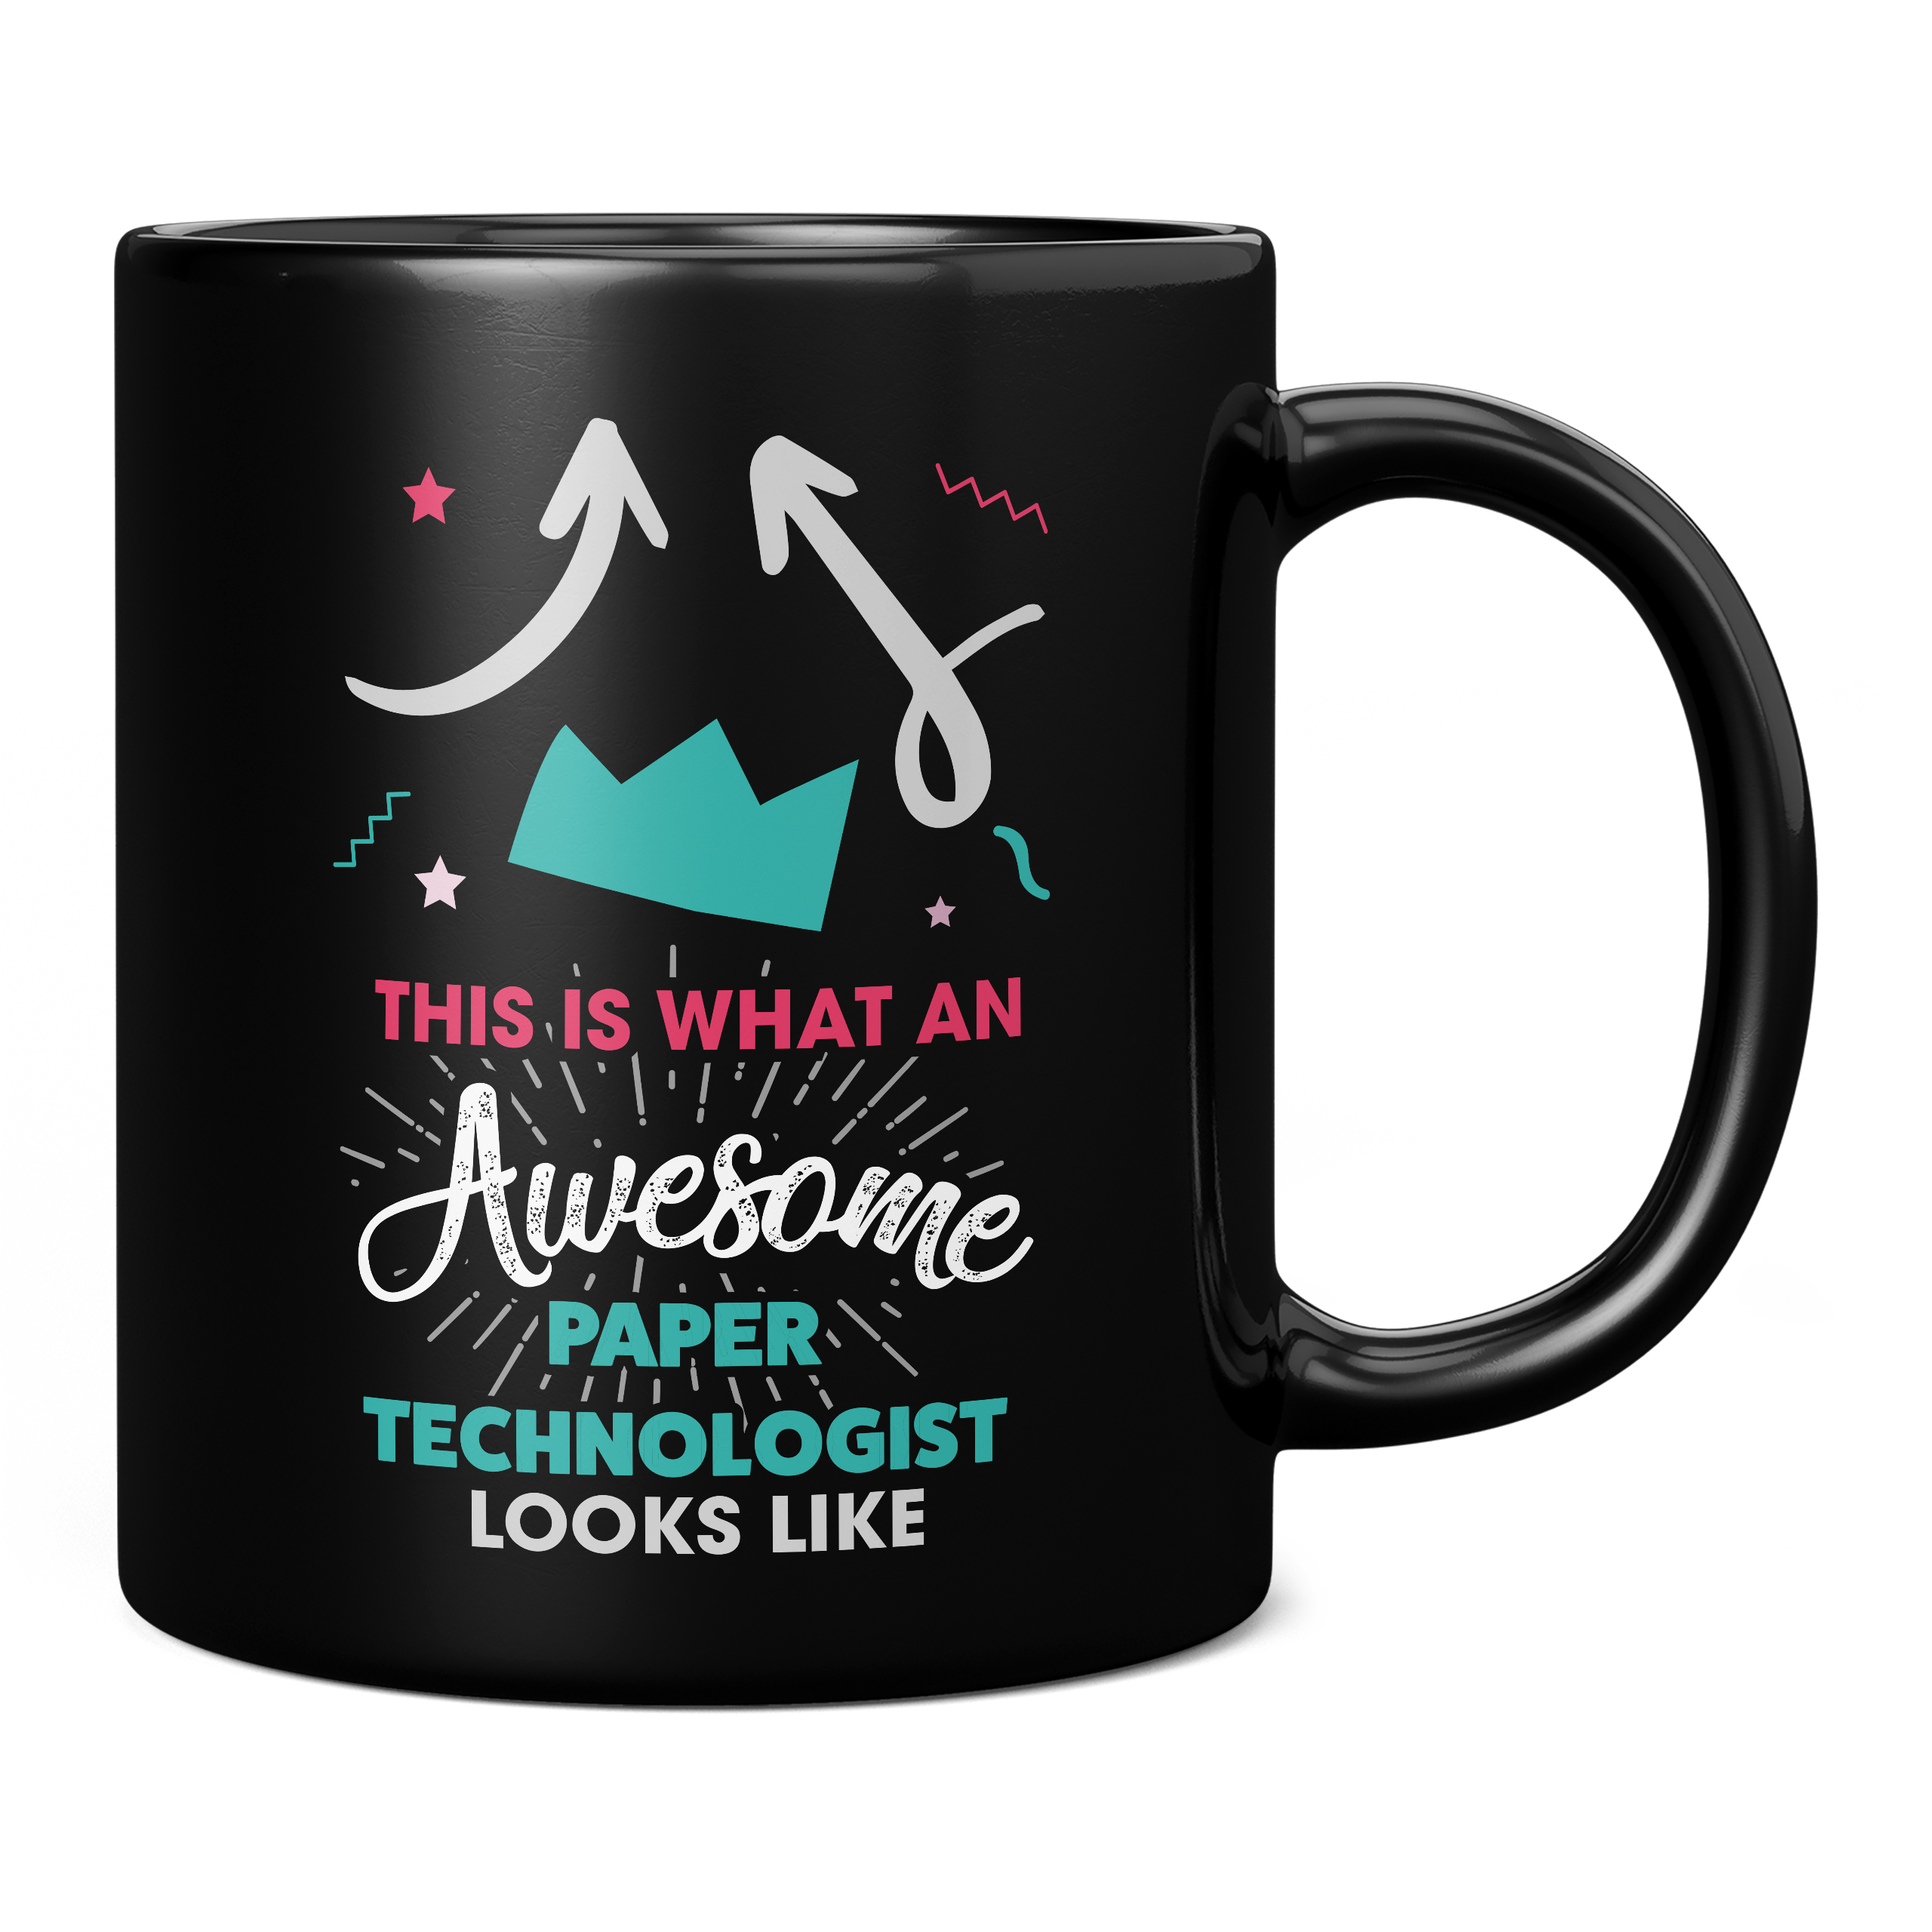 THIS IS WHAT AN AWESOME PAPER TECHNOLOGIST LOOKS LIKE 11OZ NOVELTY MUG